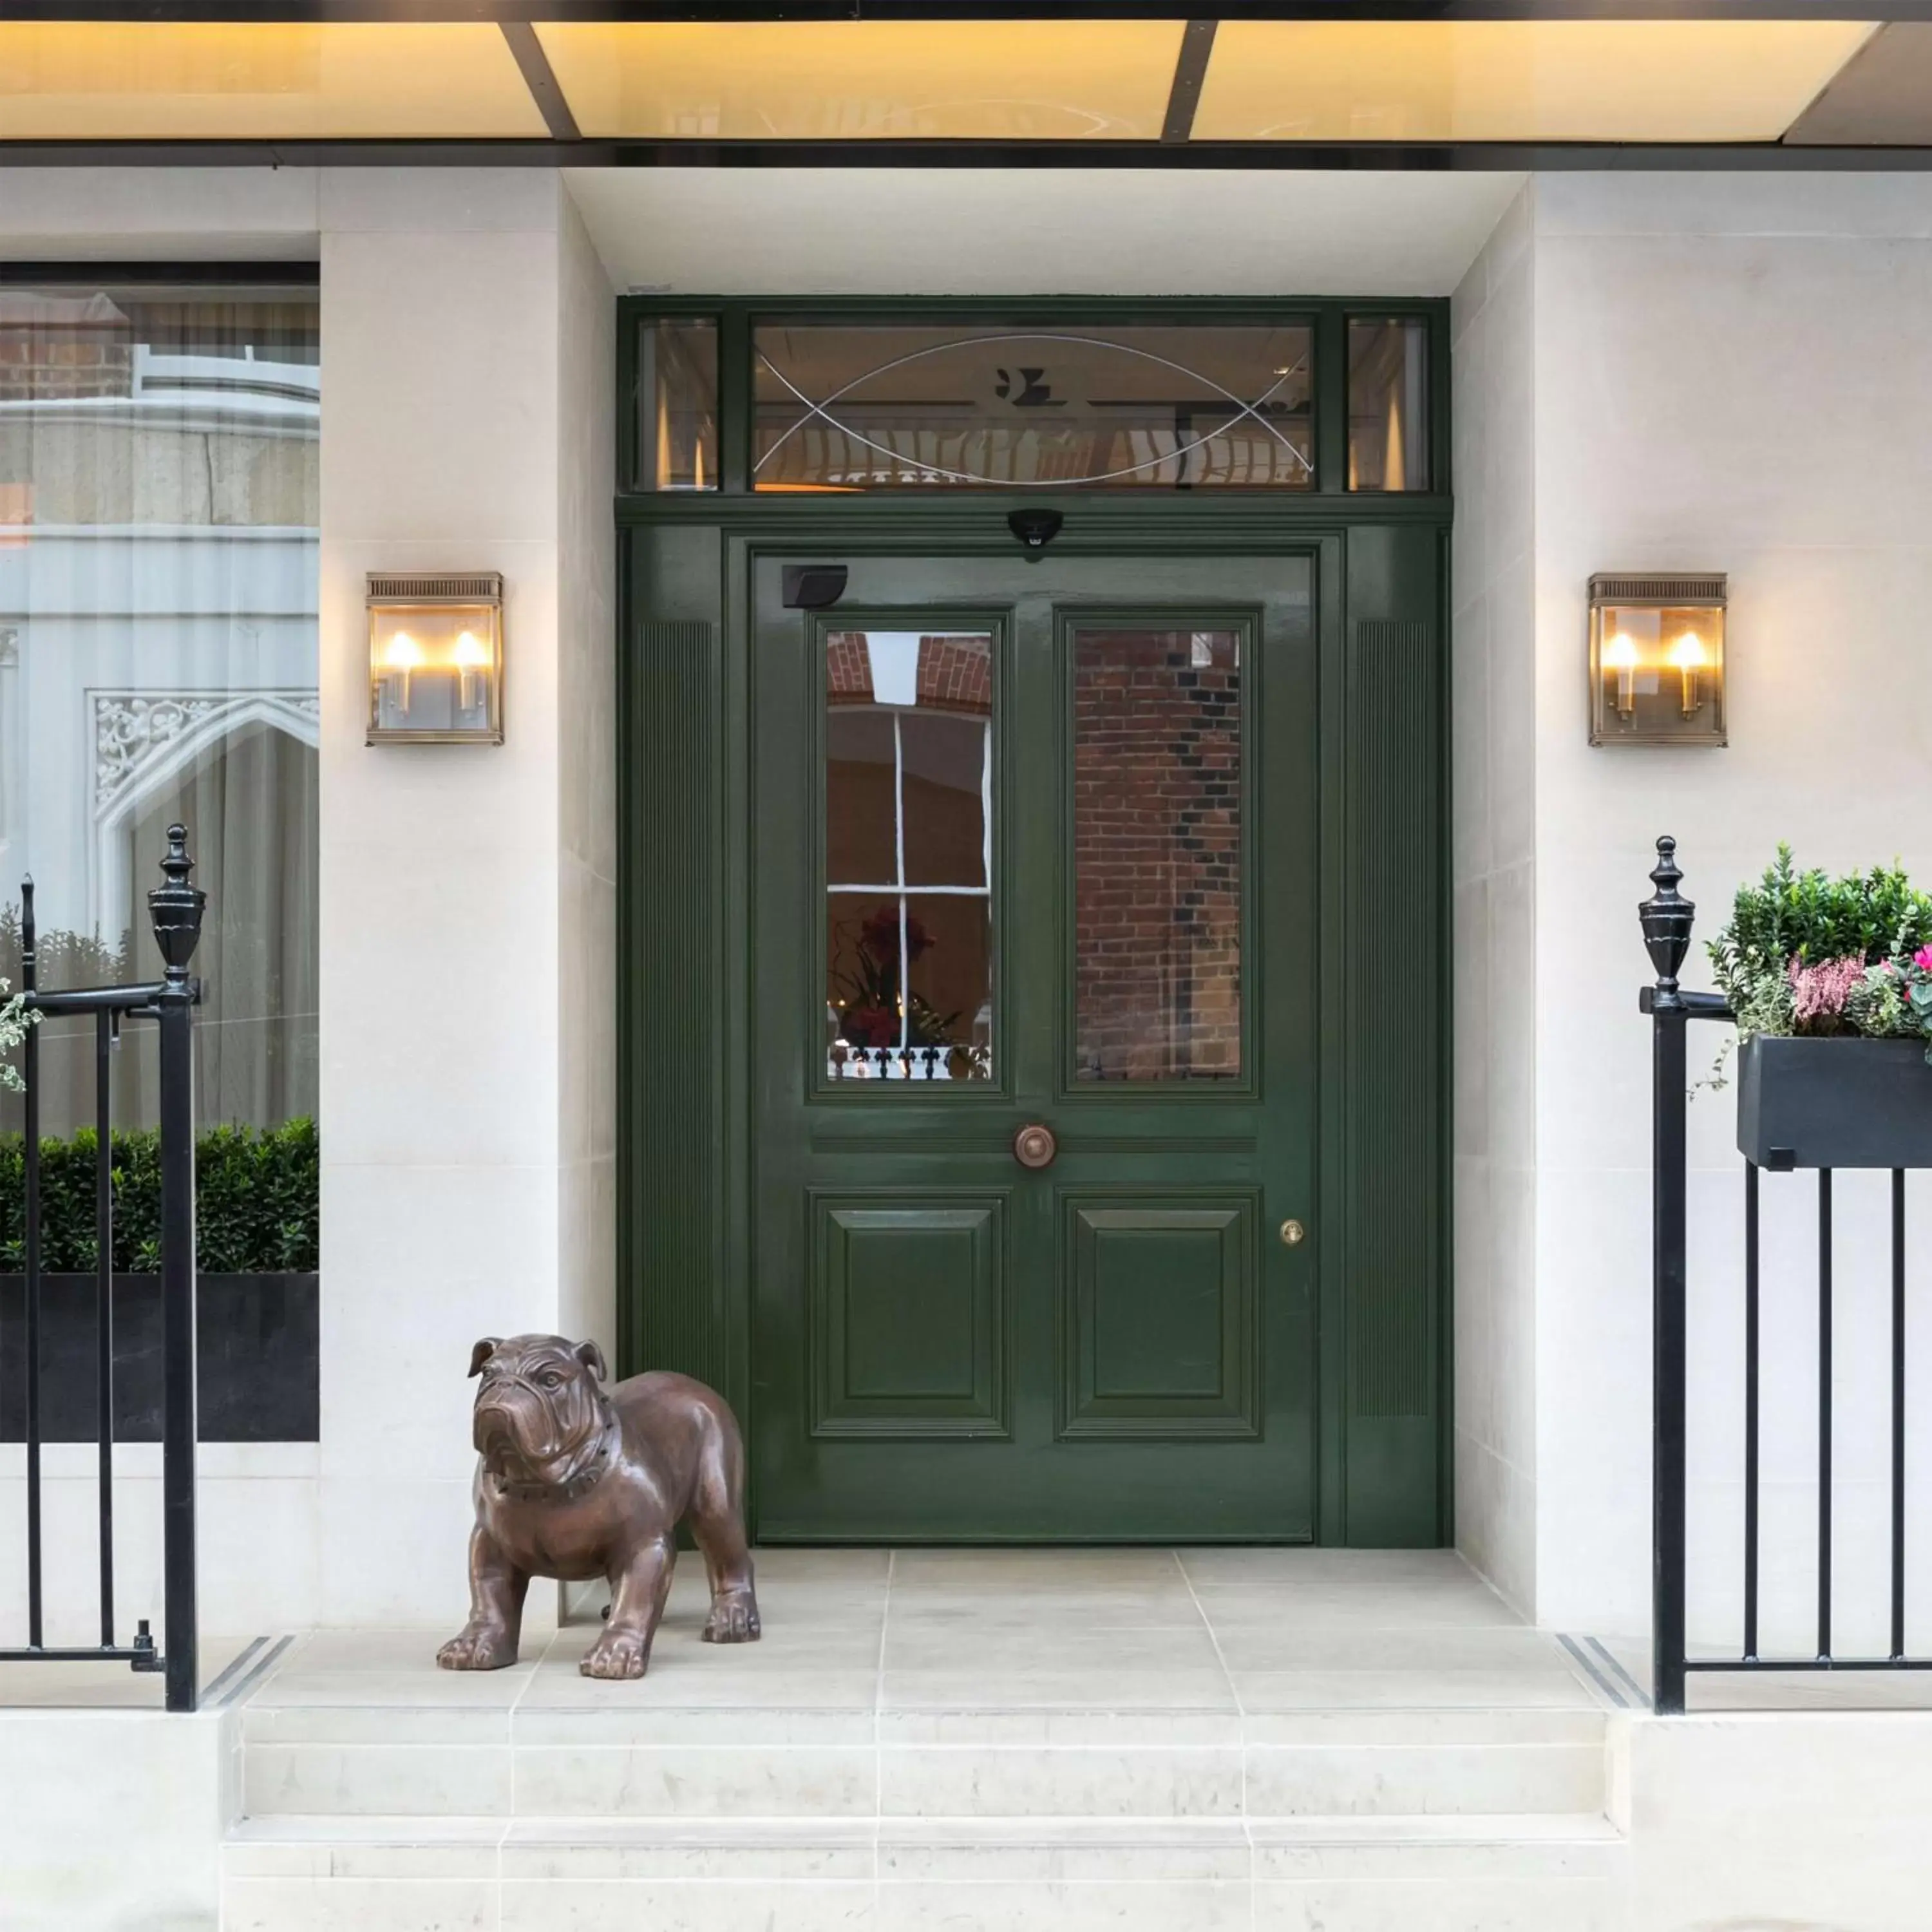 Property building, Pets in Holmes Hotel London